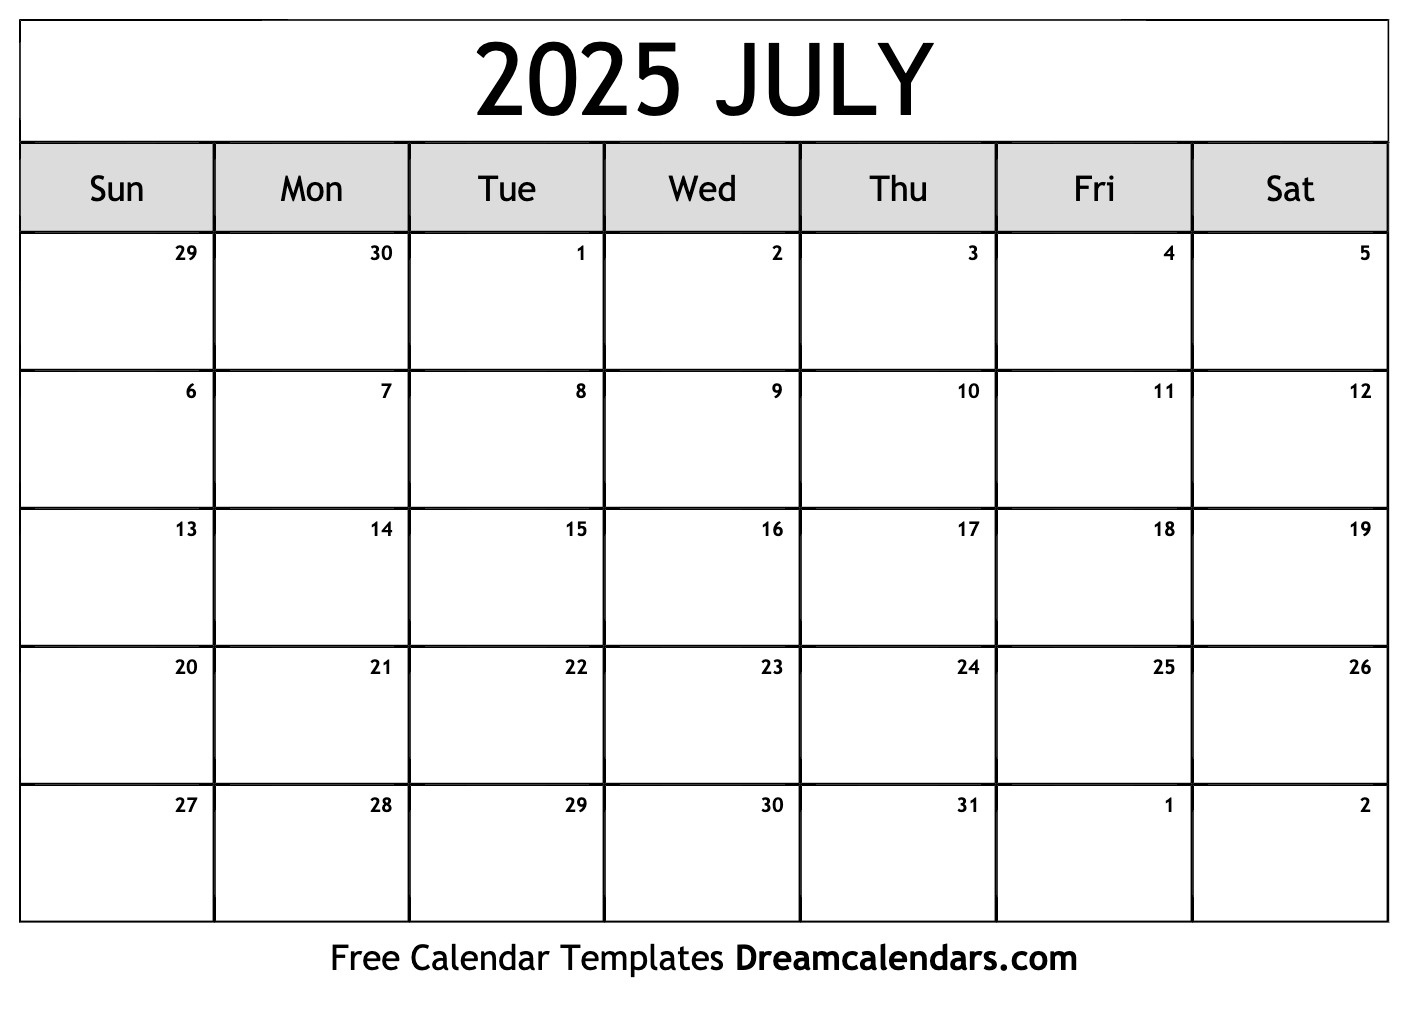 July 2025 Calendar - Free Printable With Holidays And Observances regarding Calendar For July 2025